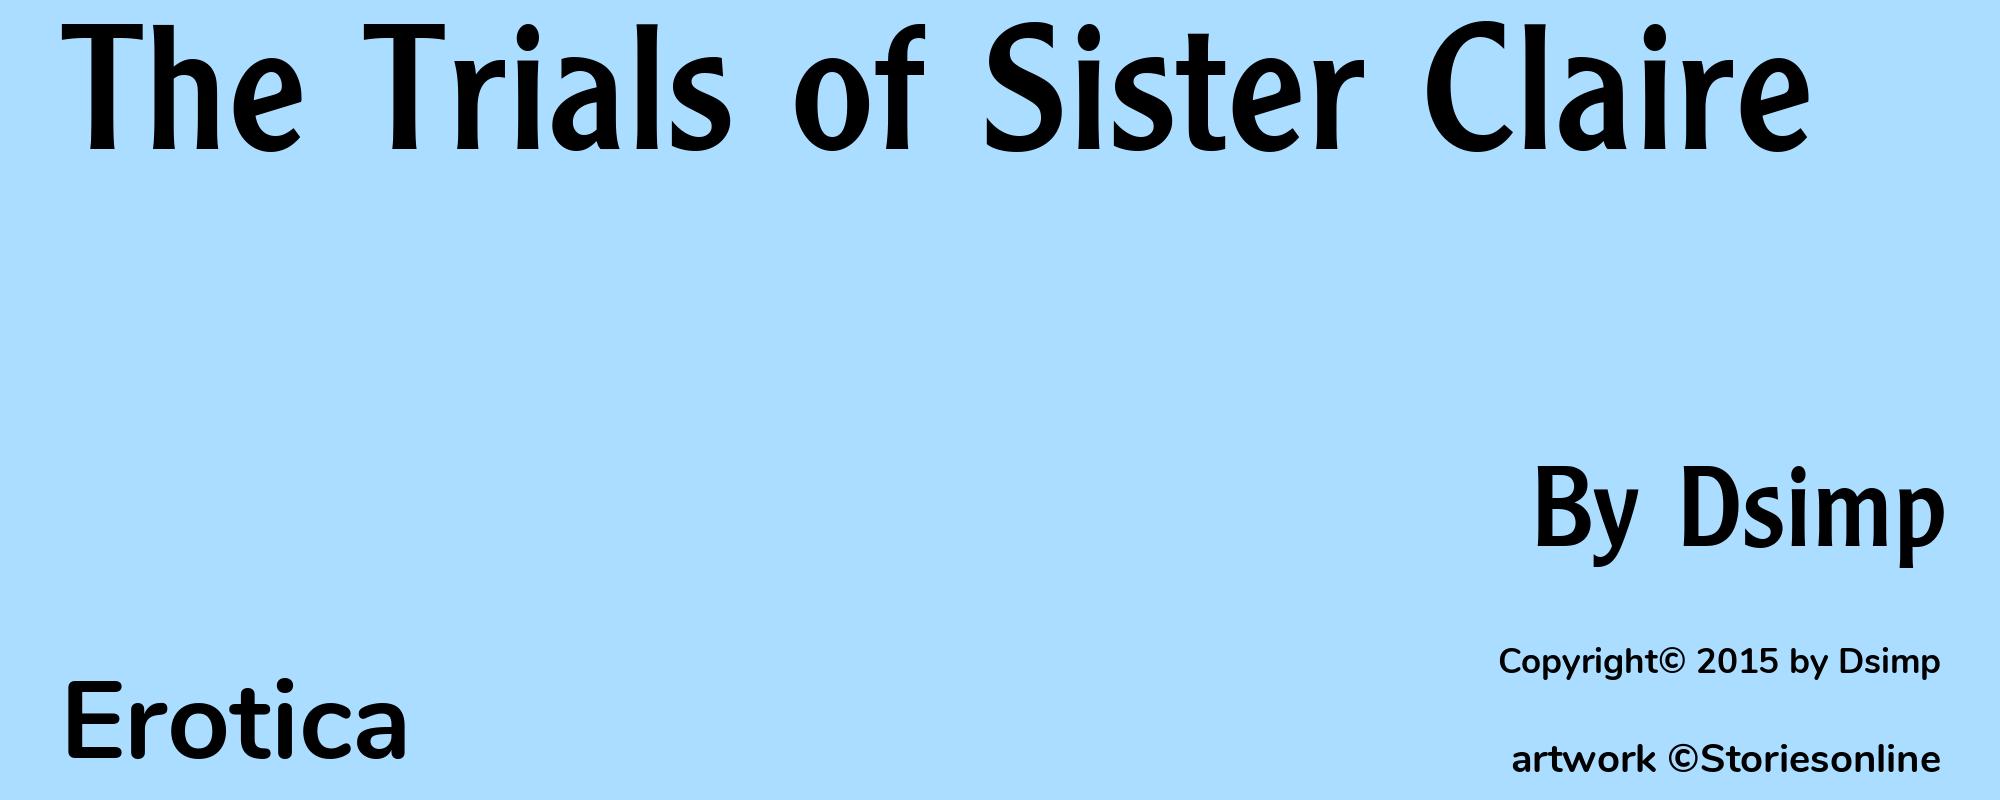 The Trials of Sister Claire - Cover